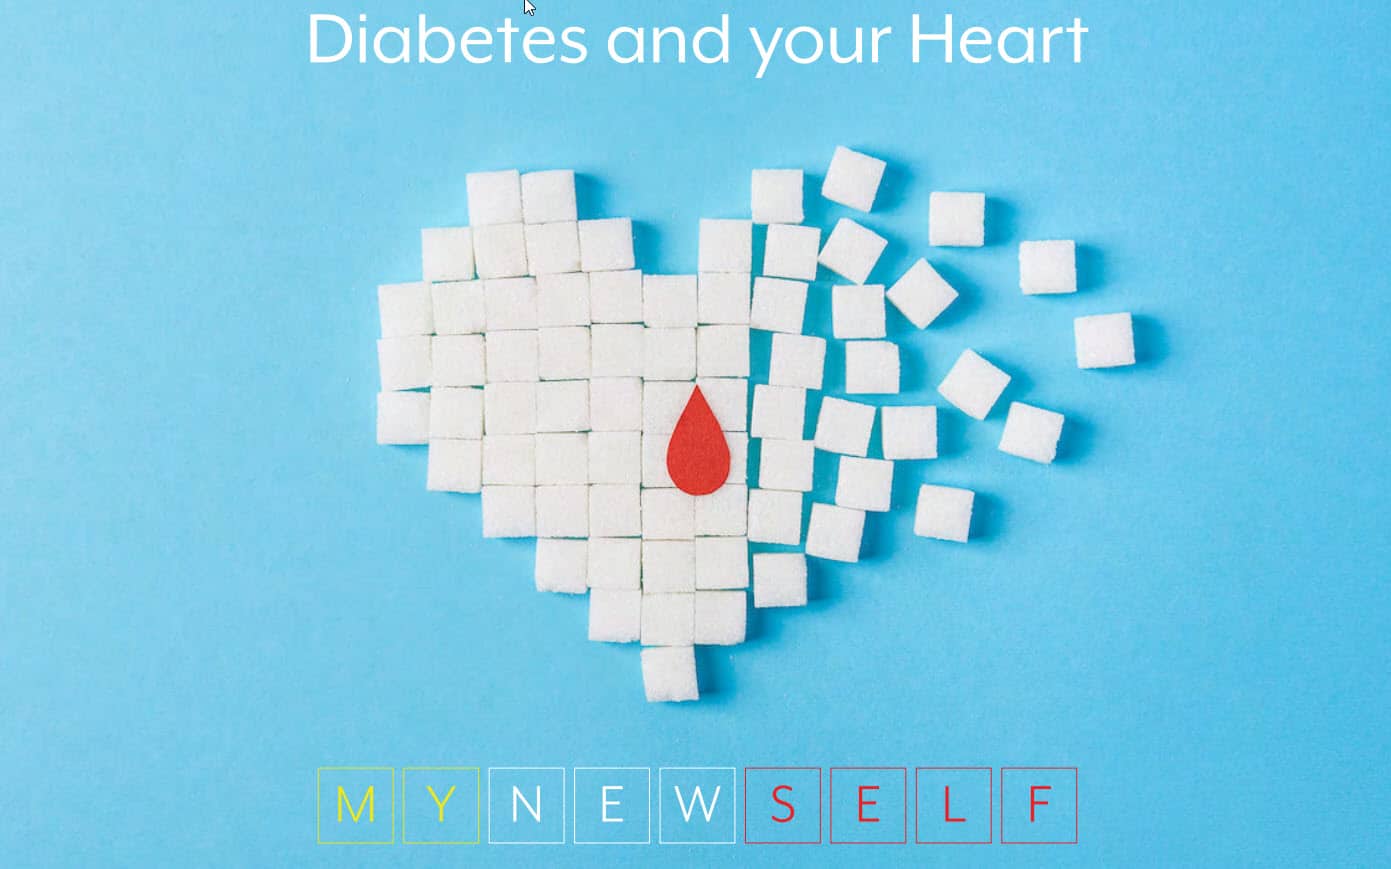 Learn why diabetes can disrupt the heart function and how to avoid it.